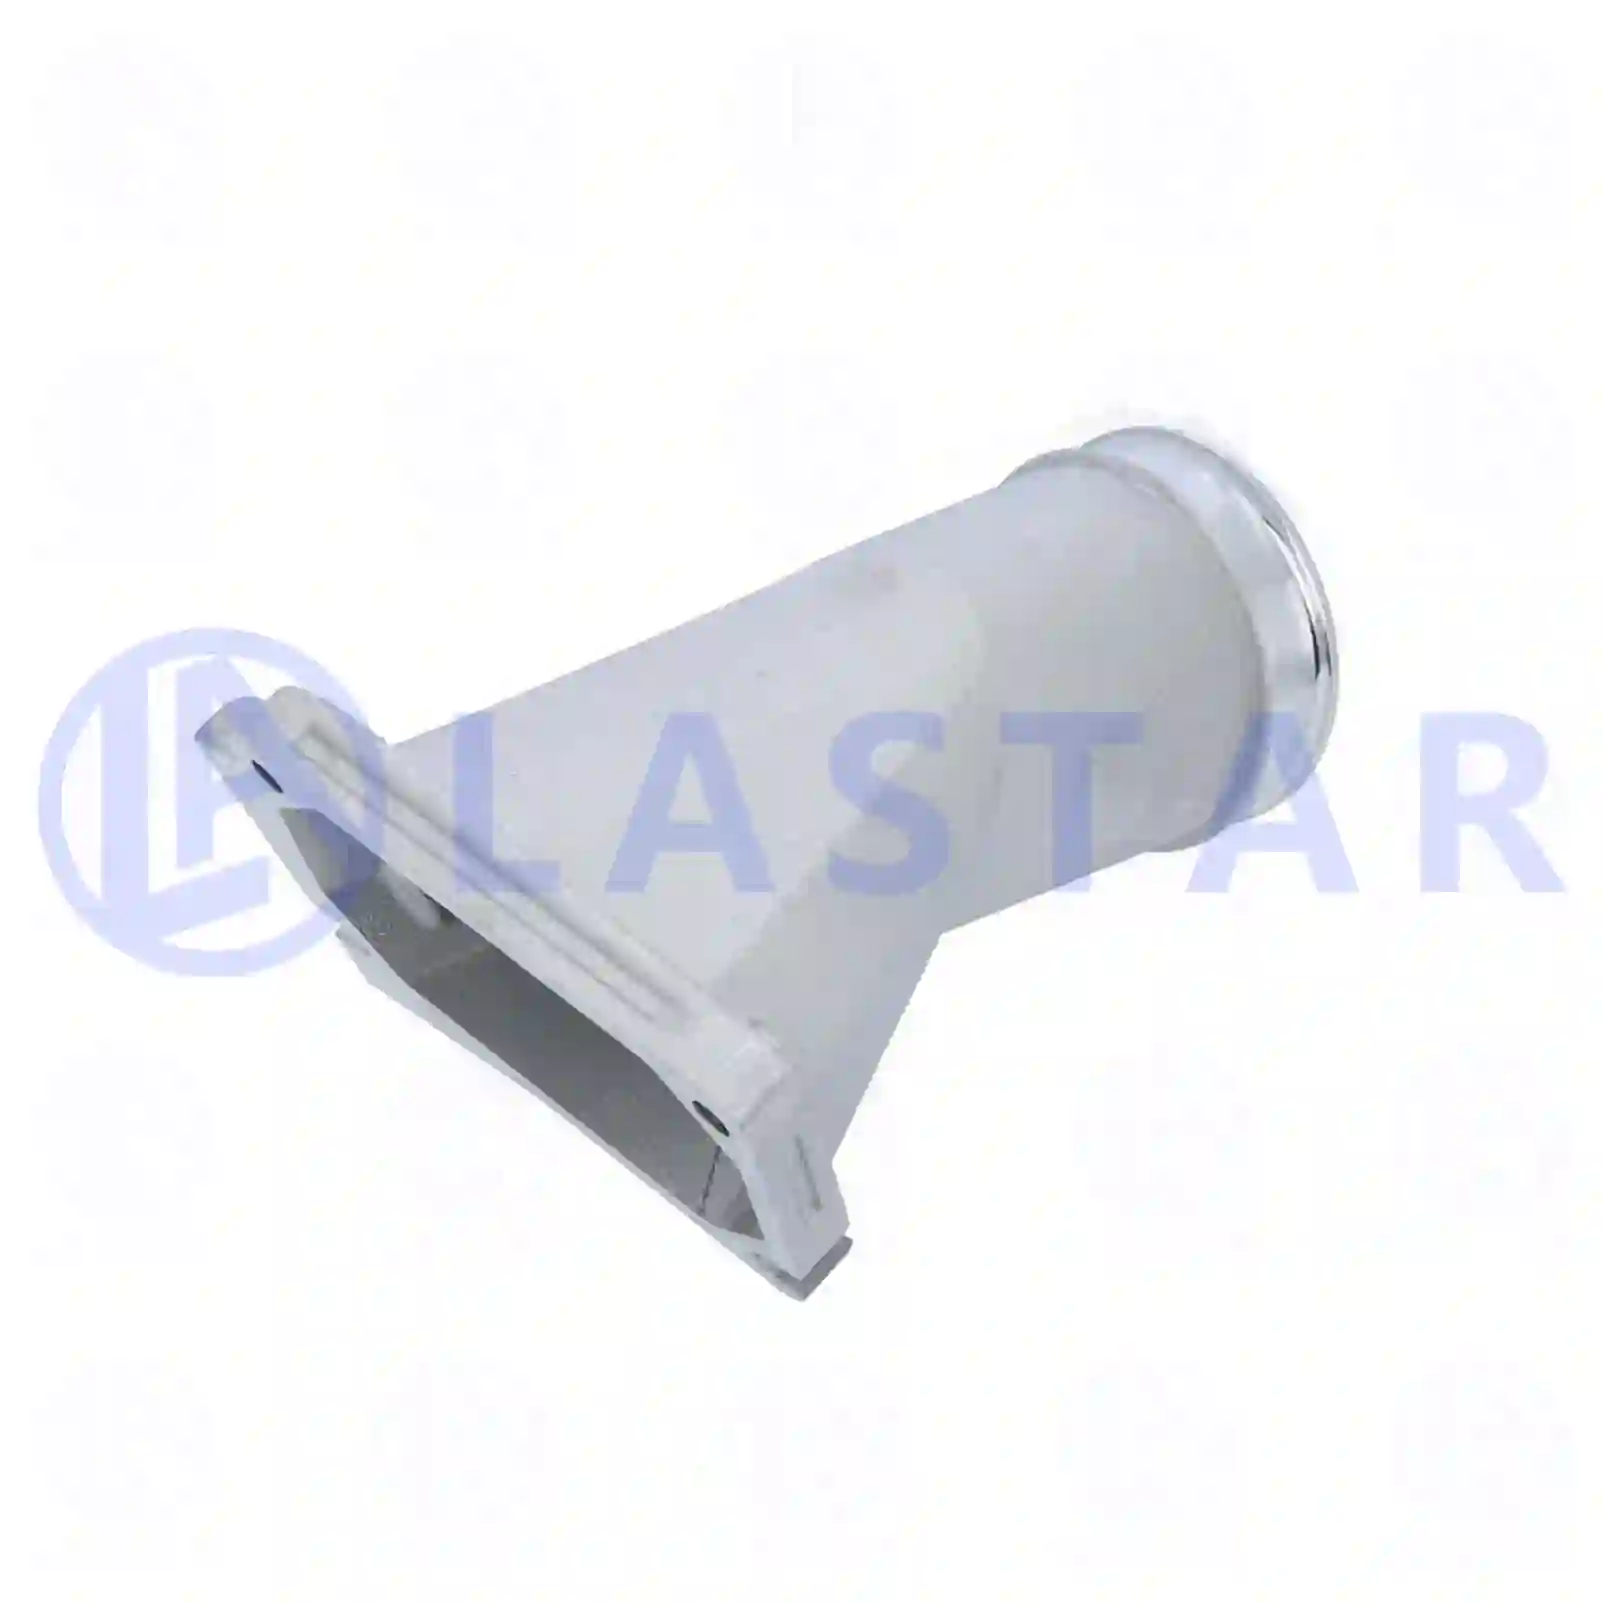 Charge air pipe, 77704085, 20561908, 8149634 ||  77704085 Lastar Spare Part | Truck Spare Parts, Auotomotive Spare Parts Charge air pipe, 77704085, 20561908, 8149634 ||  77704085 Lastar Spare Part | Truck Spare Parts, Auotomotive Spare Parts